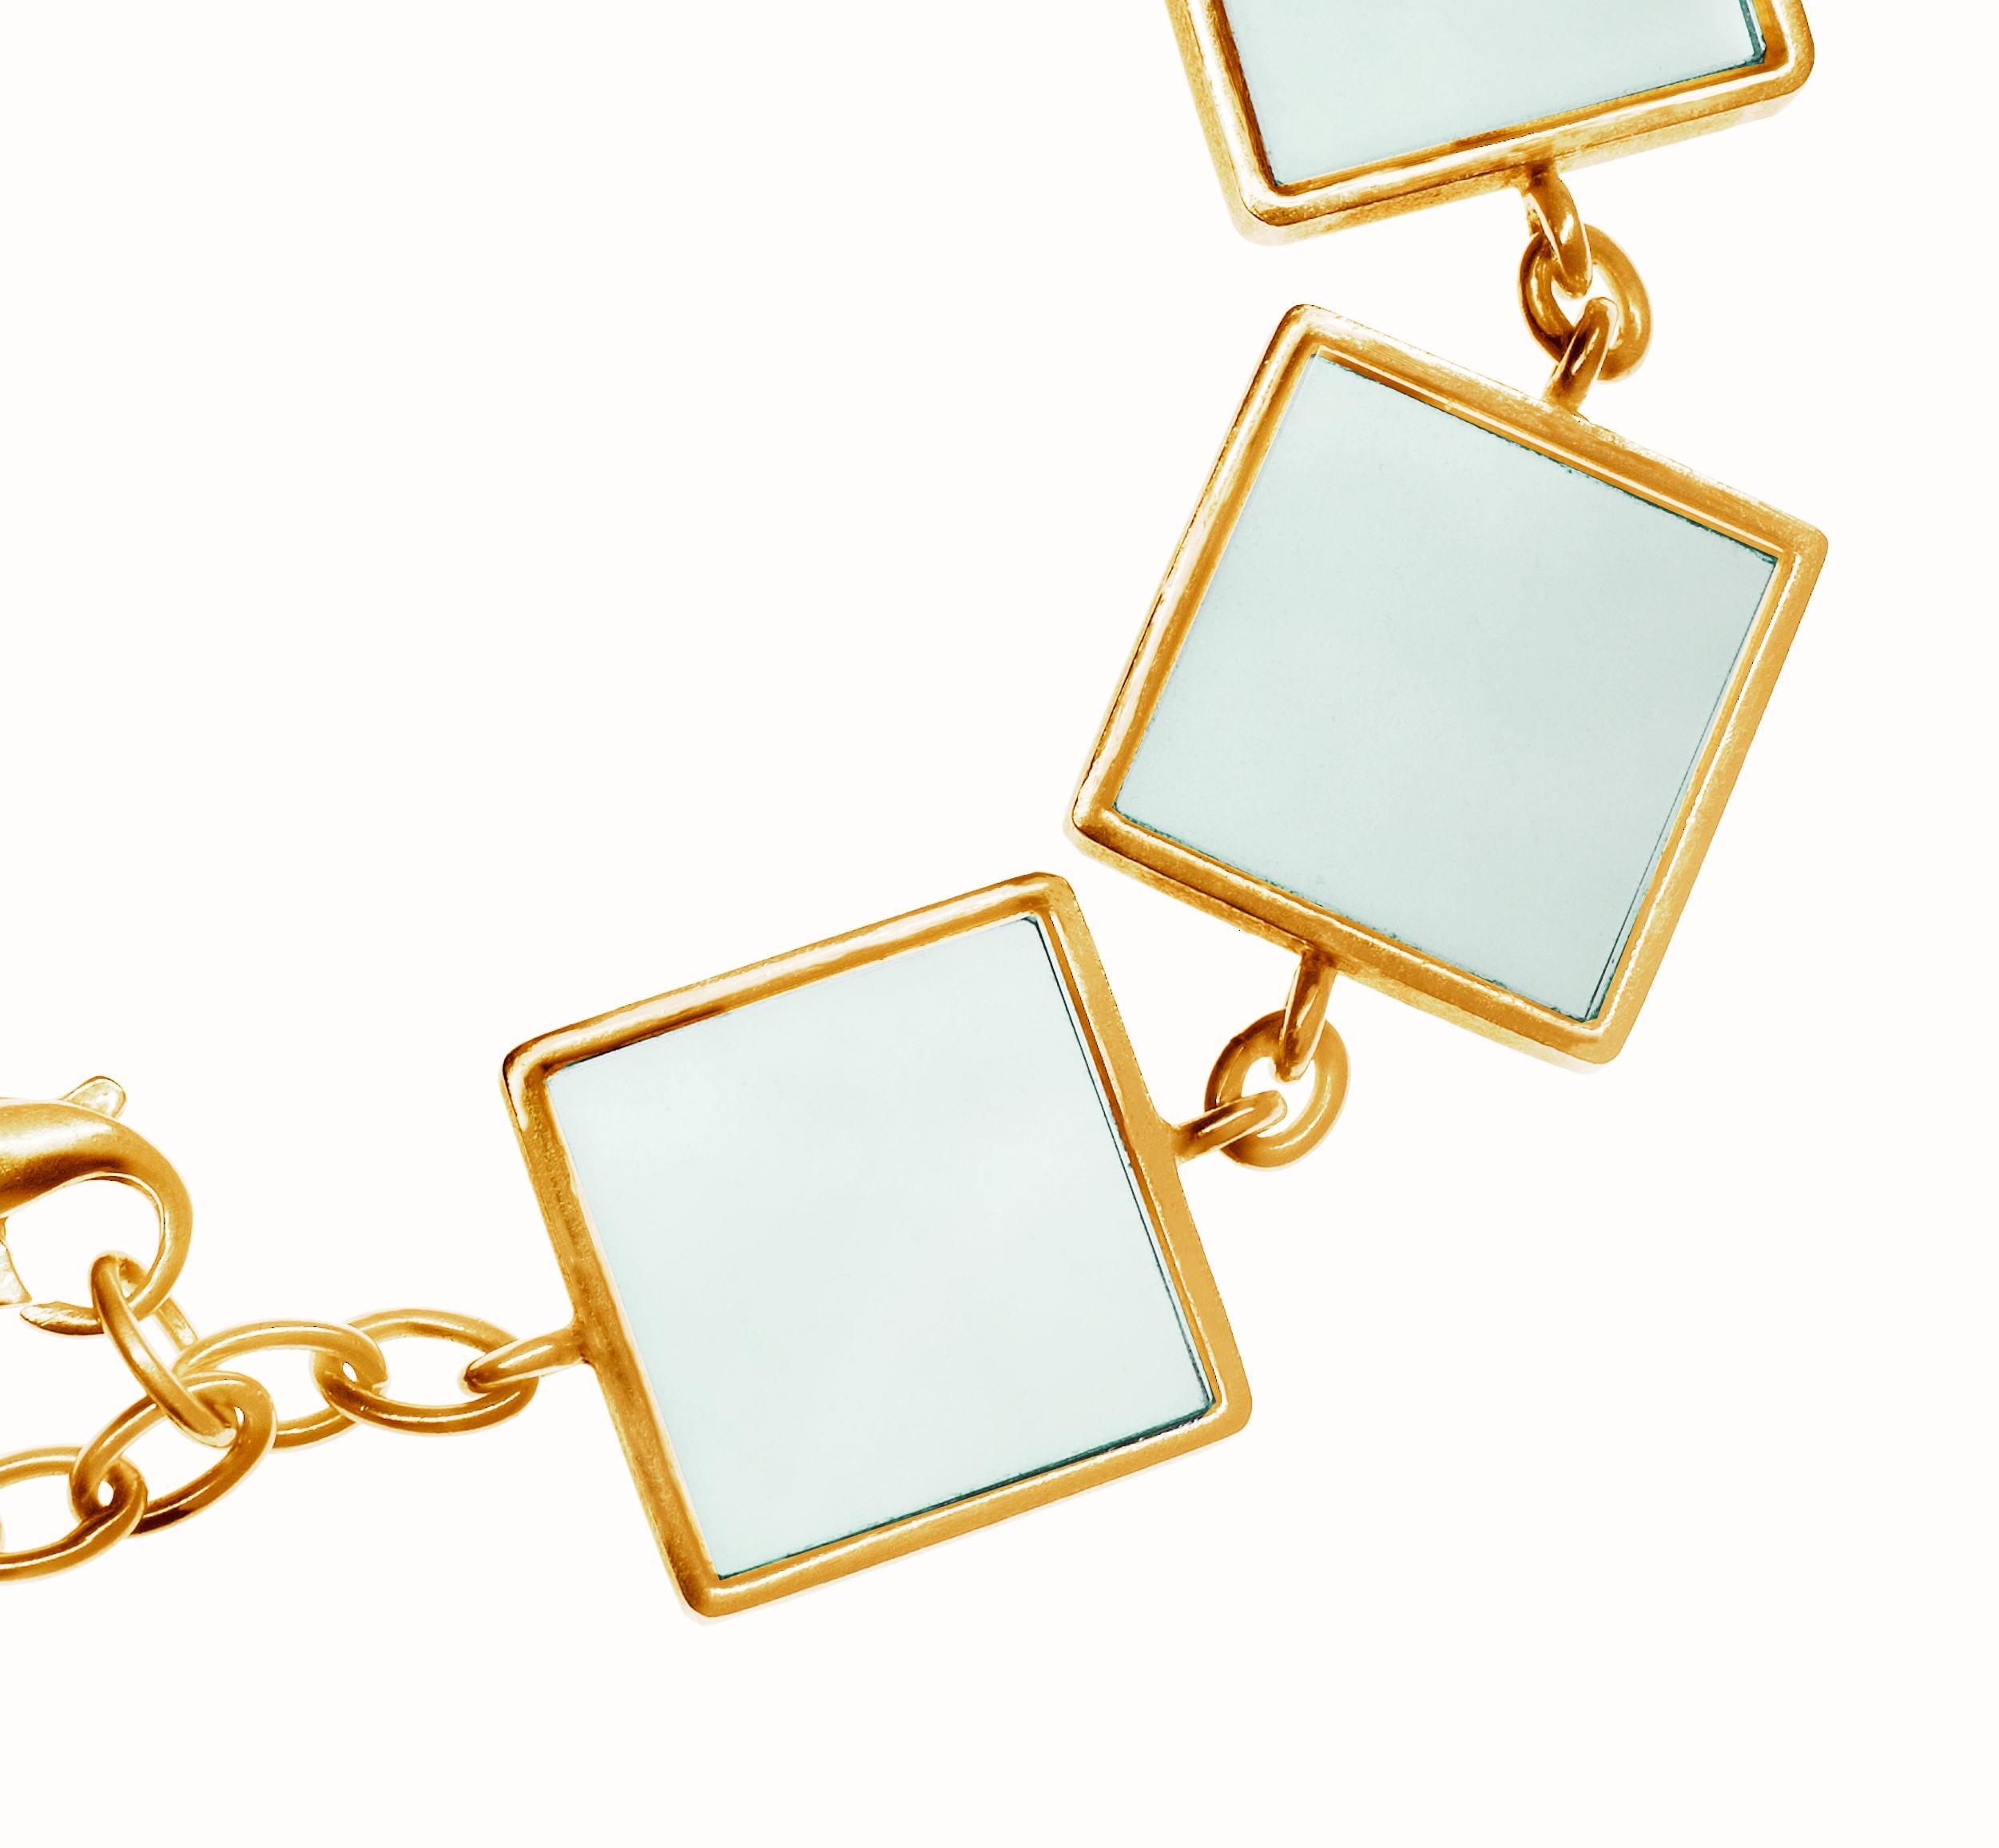 This contemporary link bracelet is made of 14 karat rose gold and features seven 15x15x3 mm grown green quartzes. It was designed by Berlin-based oil painter Polya Medvedeva and has been featured in Harper's Bazaar UA and Vogue UA.

The bracelet has